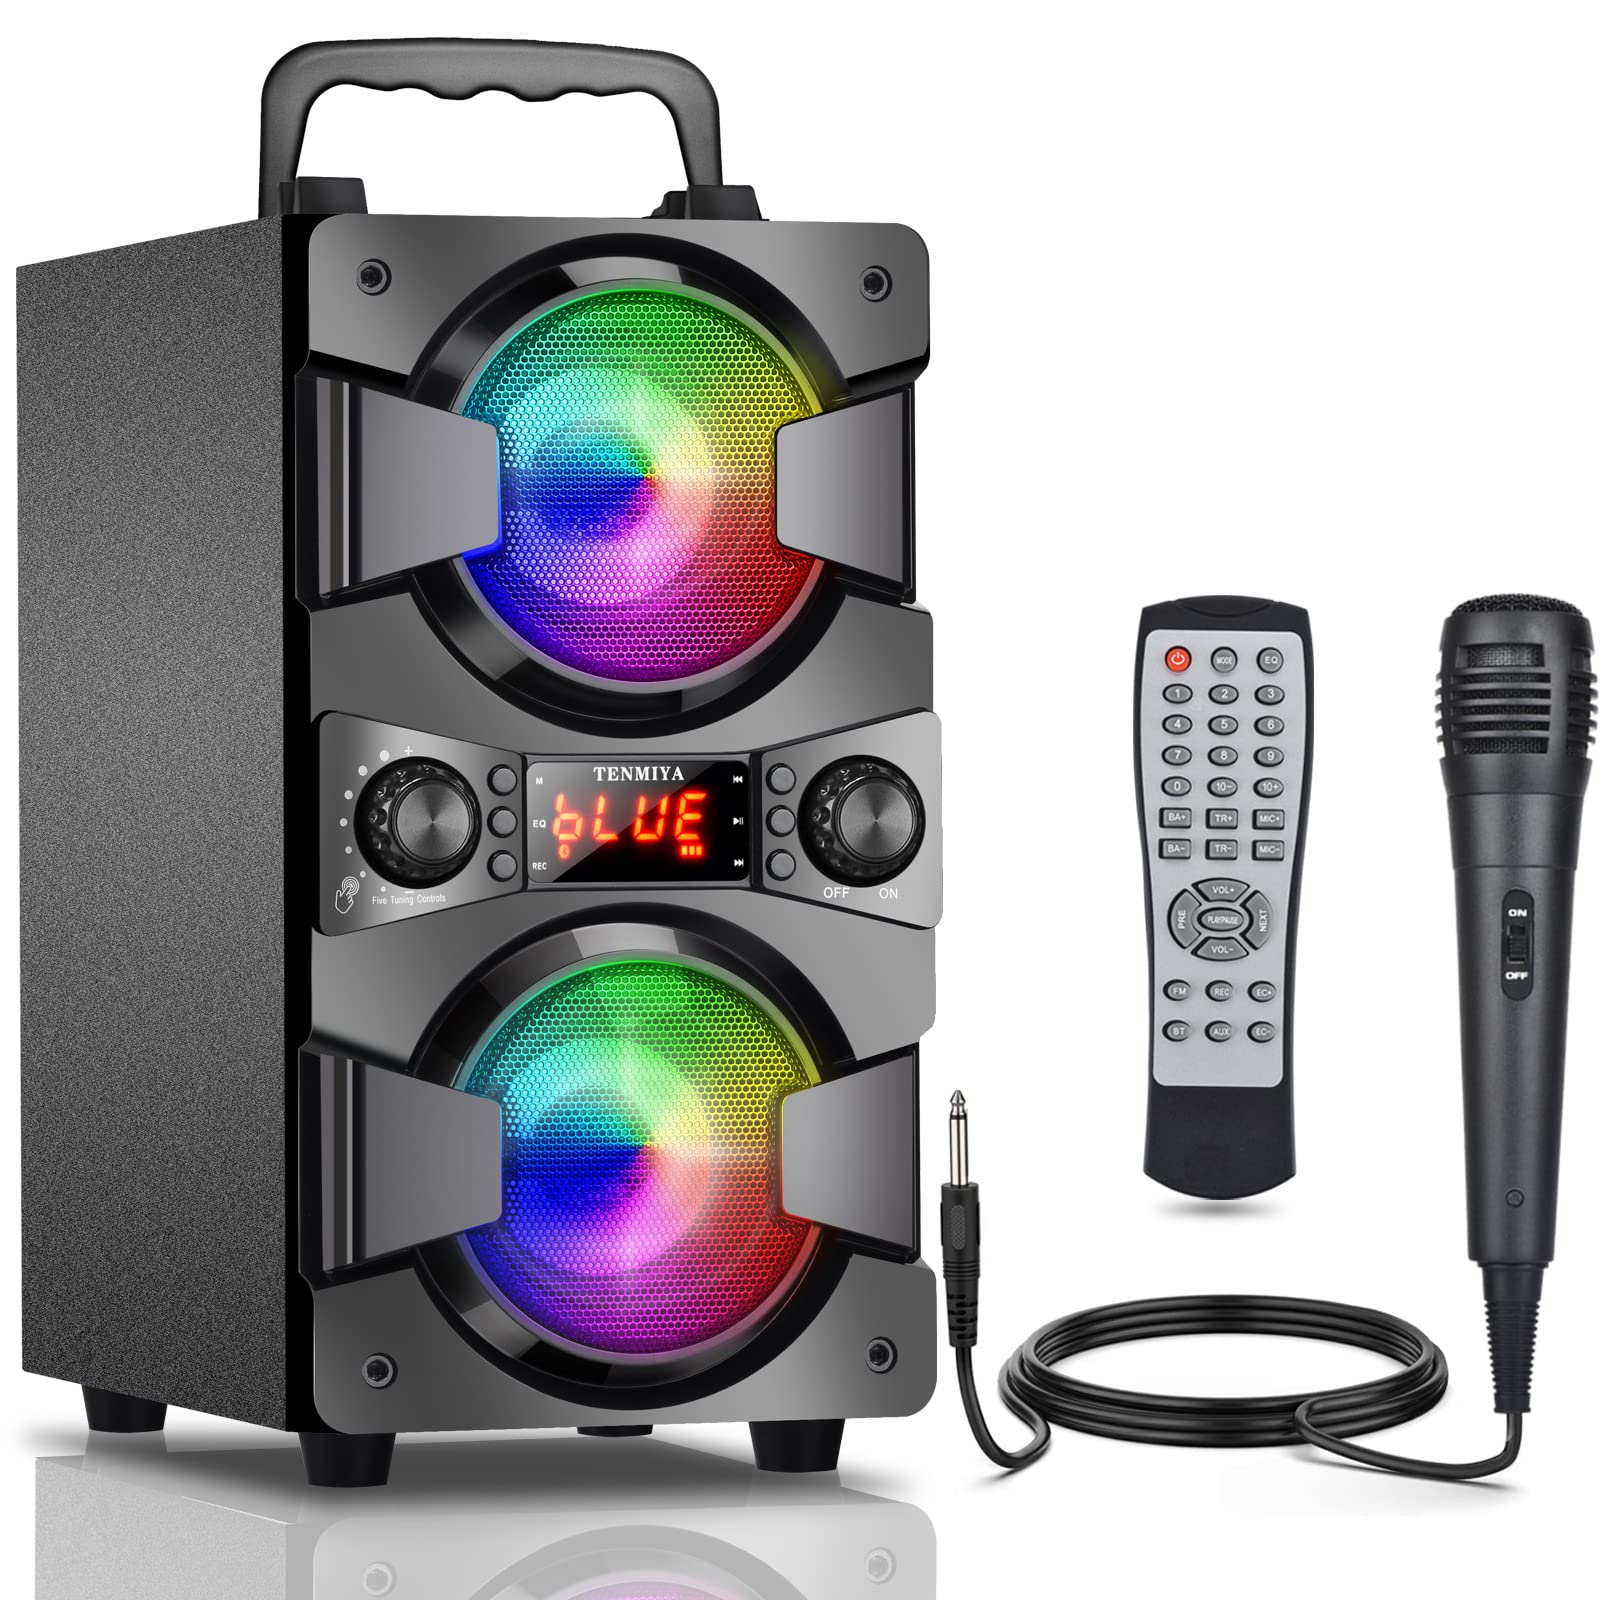 Bluetooth Speakers, 60W(80W Peak) Portable Wireless Speaker with Lights, Microphone, Double Subwoofer Heavy Bass, FM Radio, Remote, Rich Stereo, Loud Speaker for Home Outdoor Party